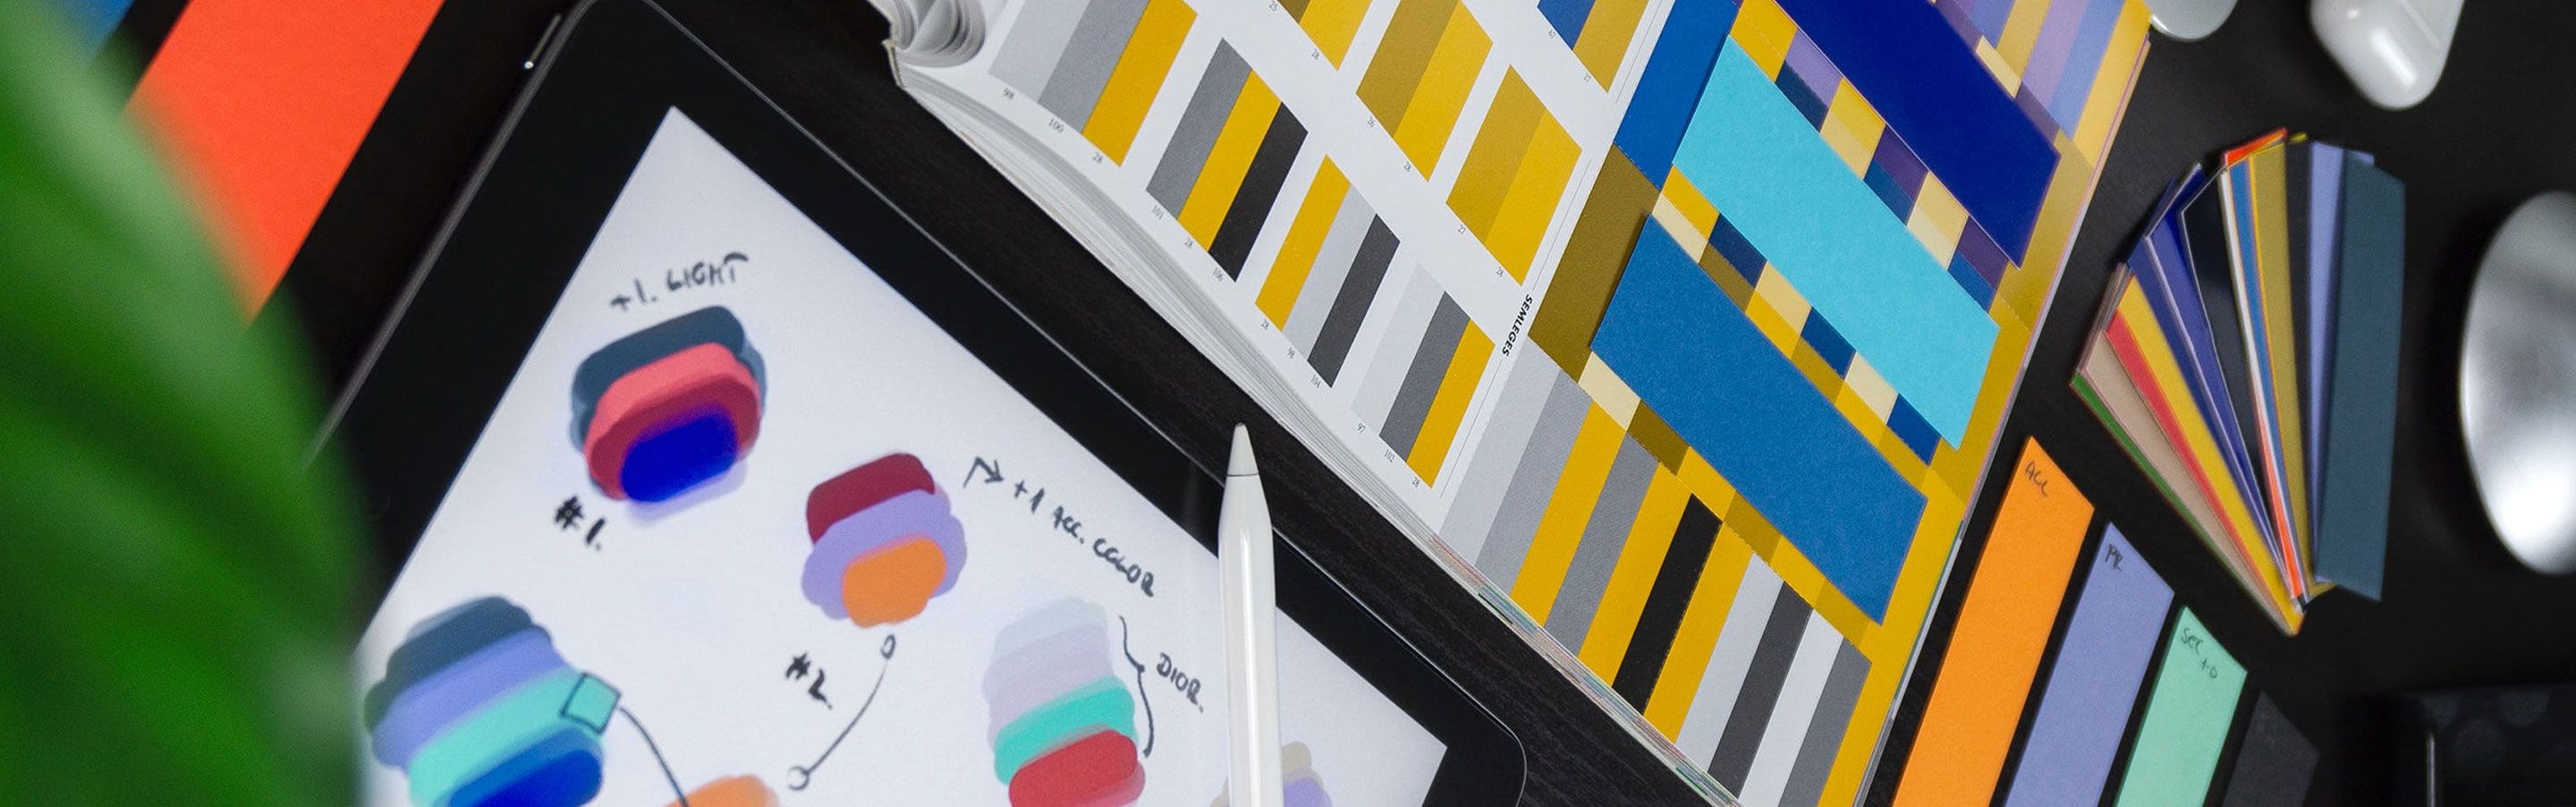 A graphic designer’s workspace featuring sketches and color swatches.